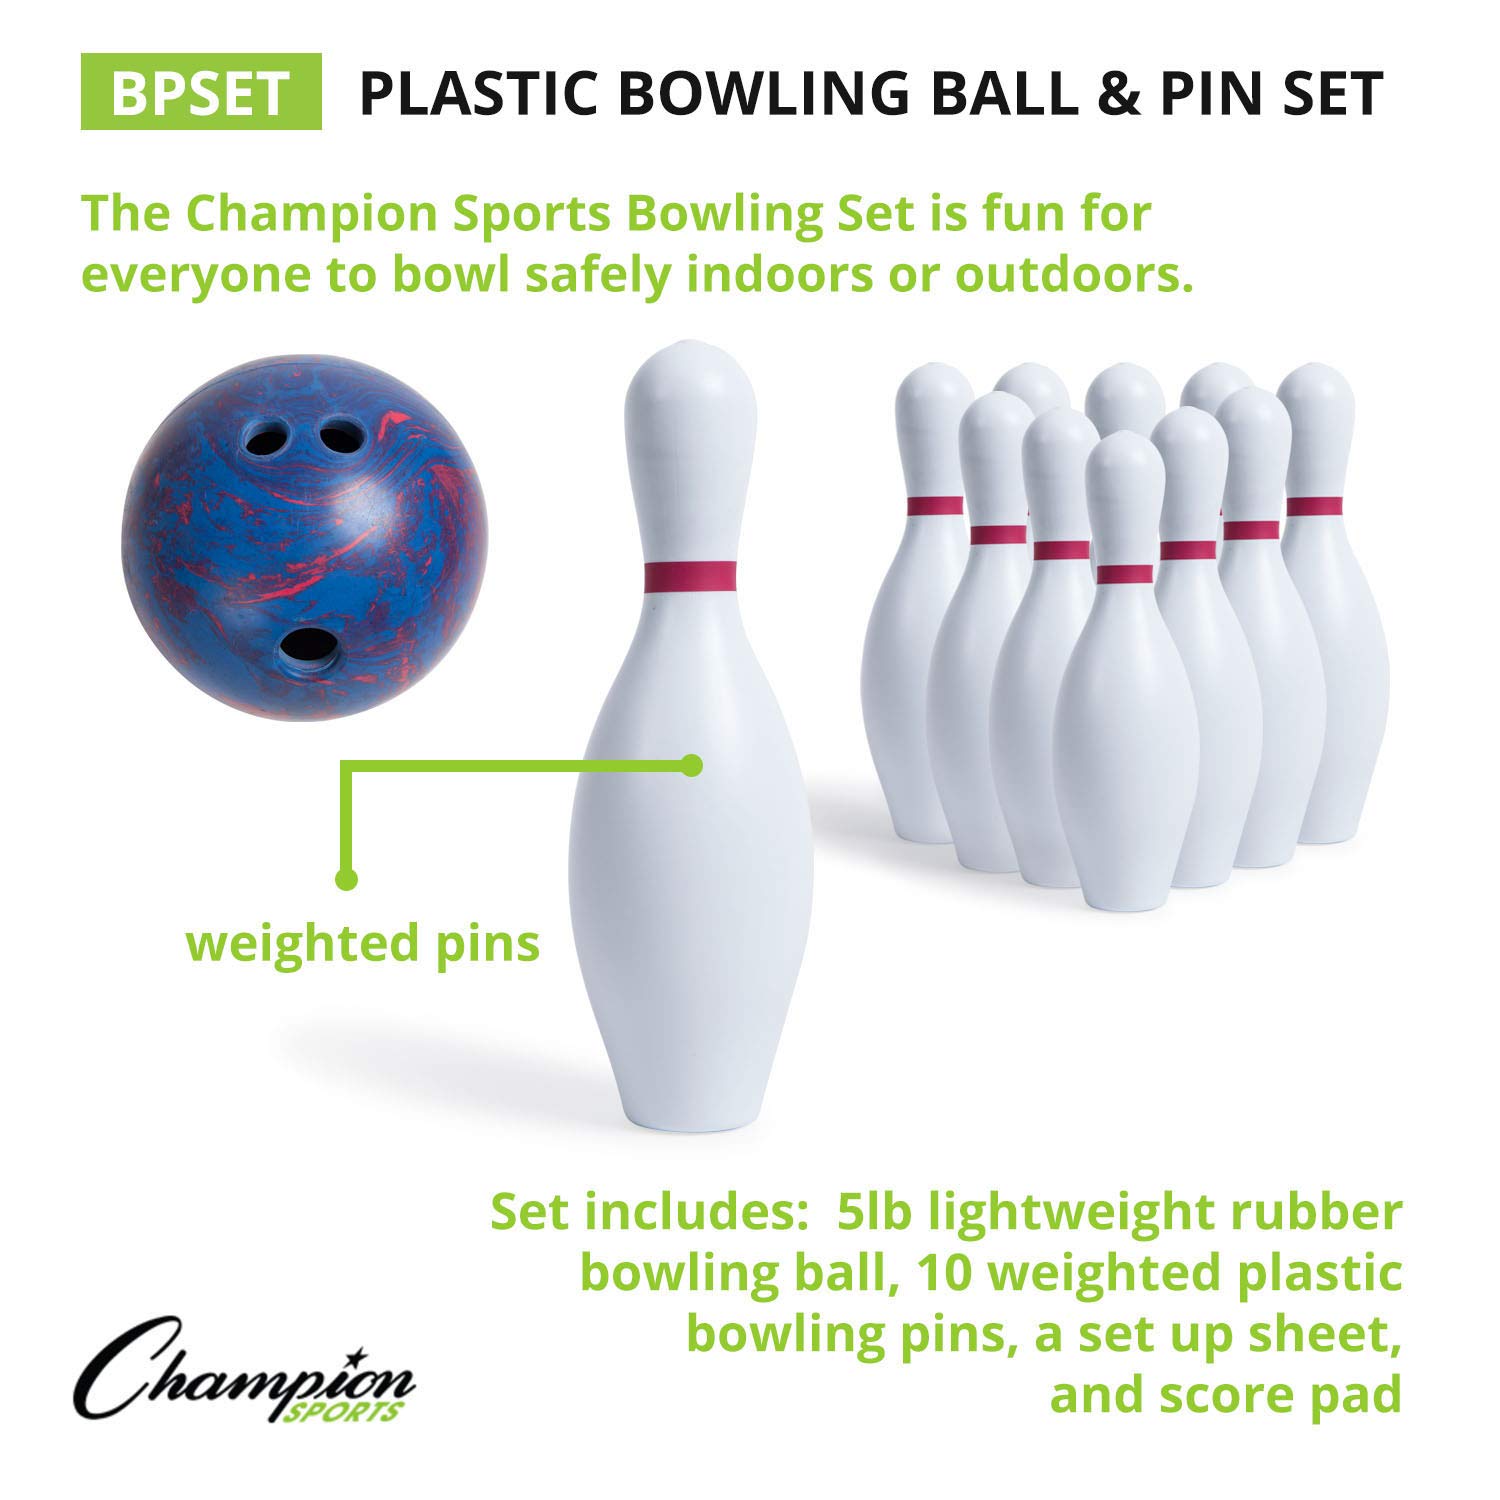 Champion Sports Bowling Set: Rubber Ball & Plastic Pins for Training, Model:BPSET